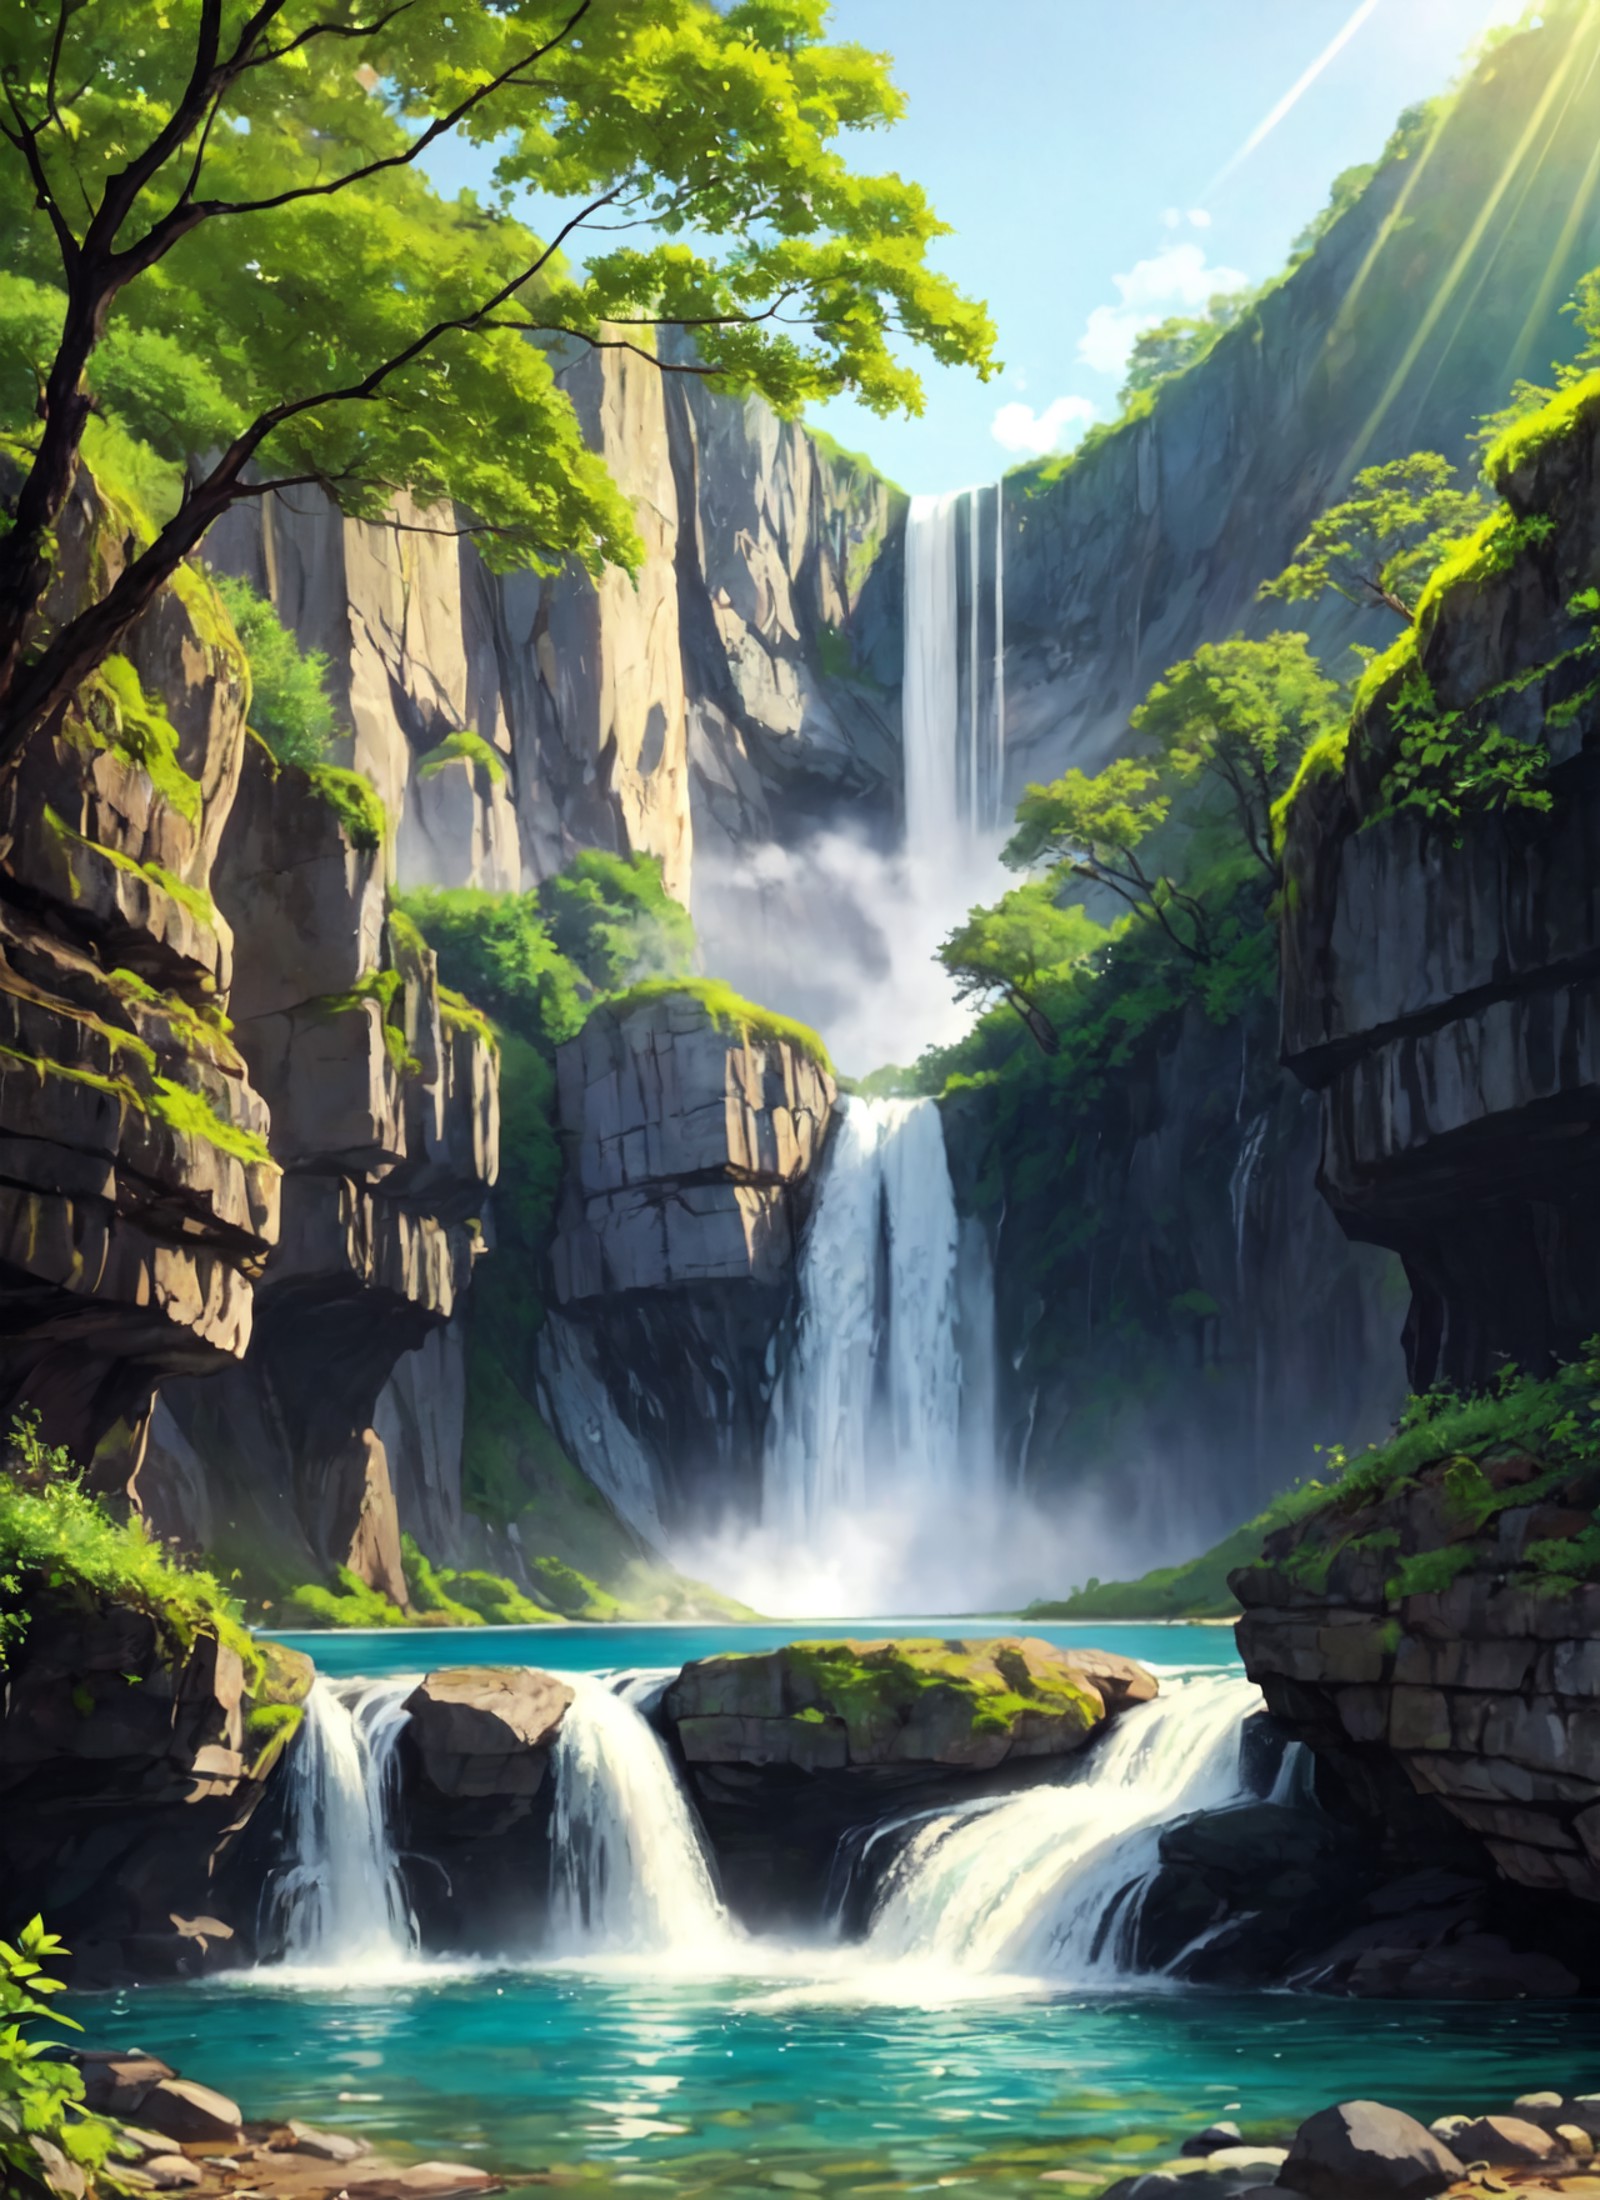 majestic waterfall oasis, cascading waters and lush vegetation, BREAK, colors: emerald greens, vibrant blues, and misty wh...